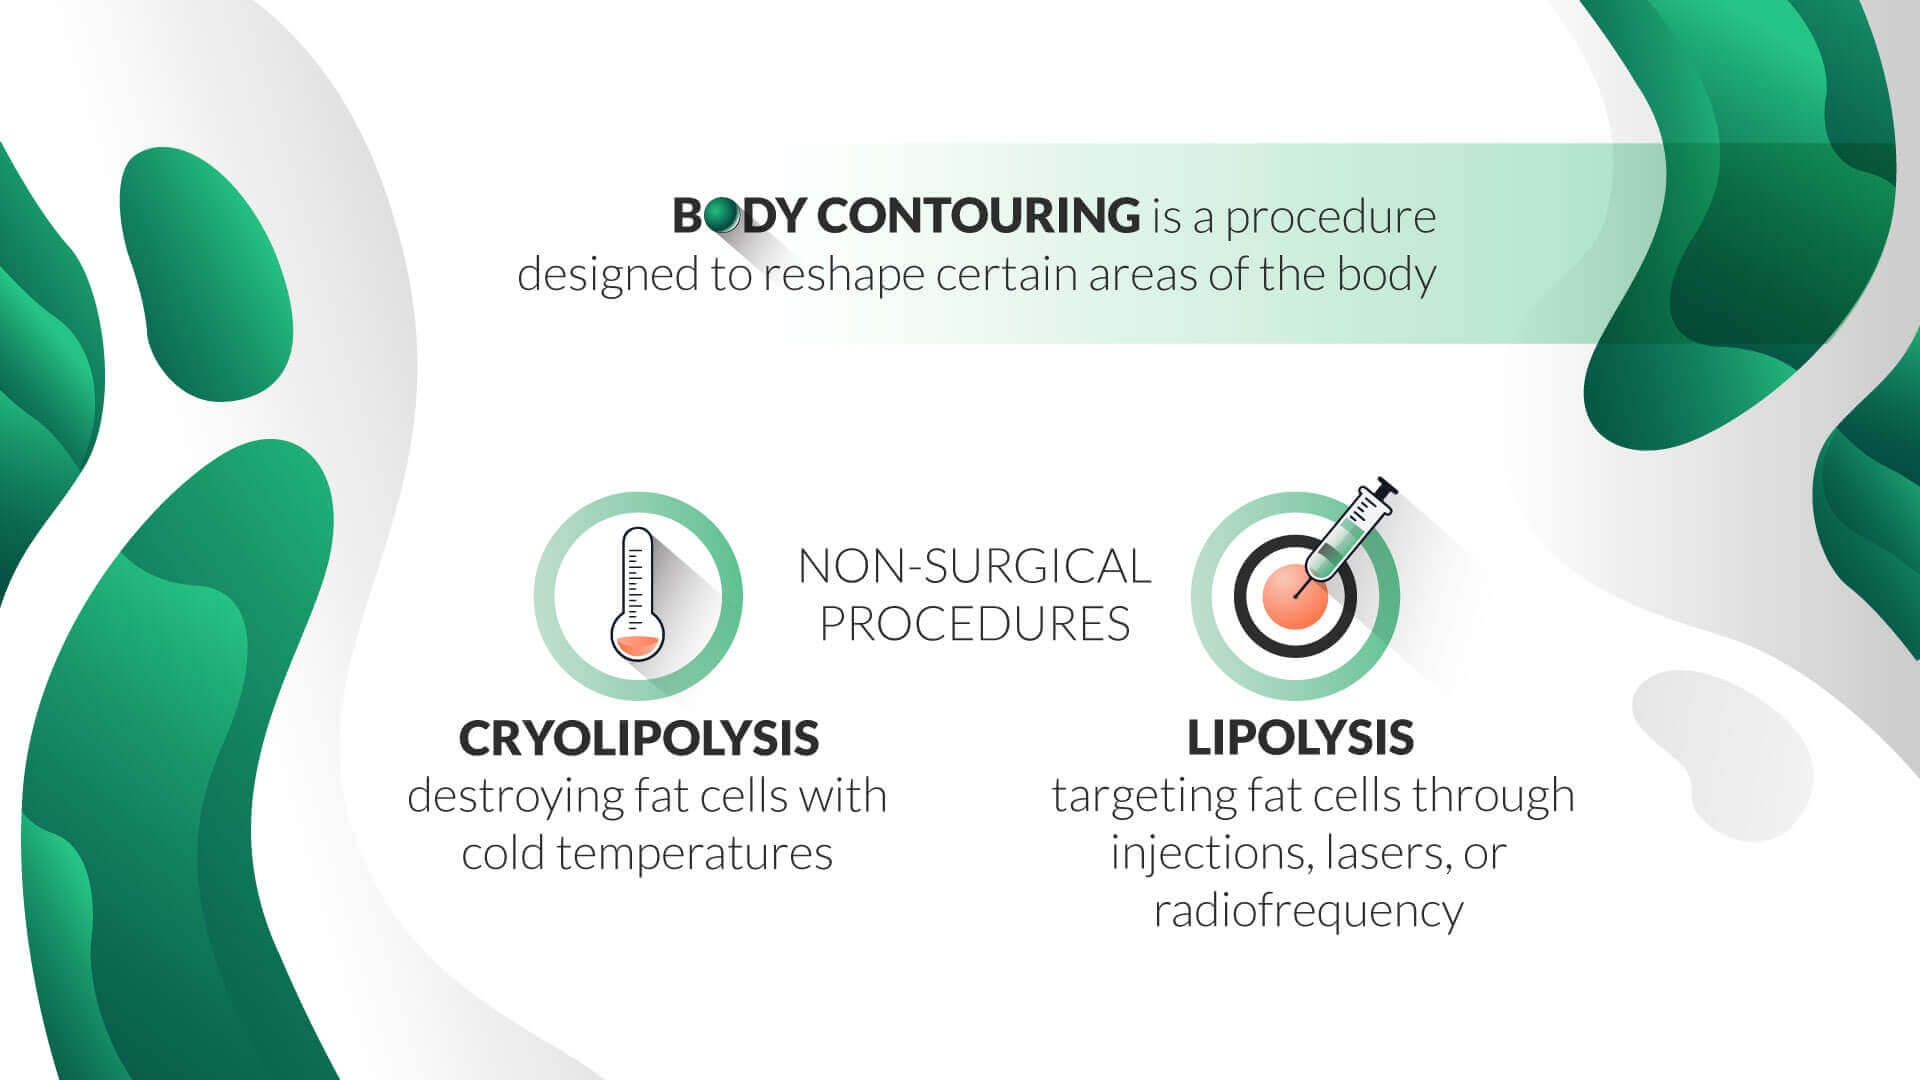 Will Body Contouring Be the “It” Procedure in 2021?